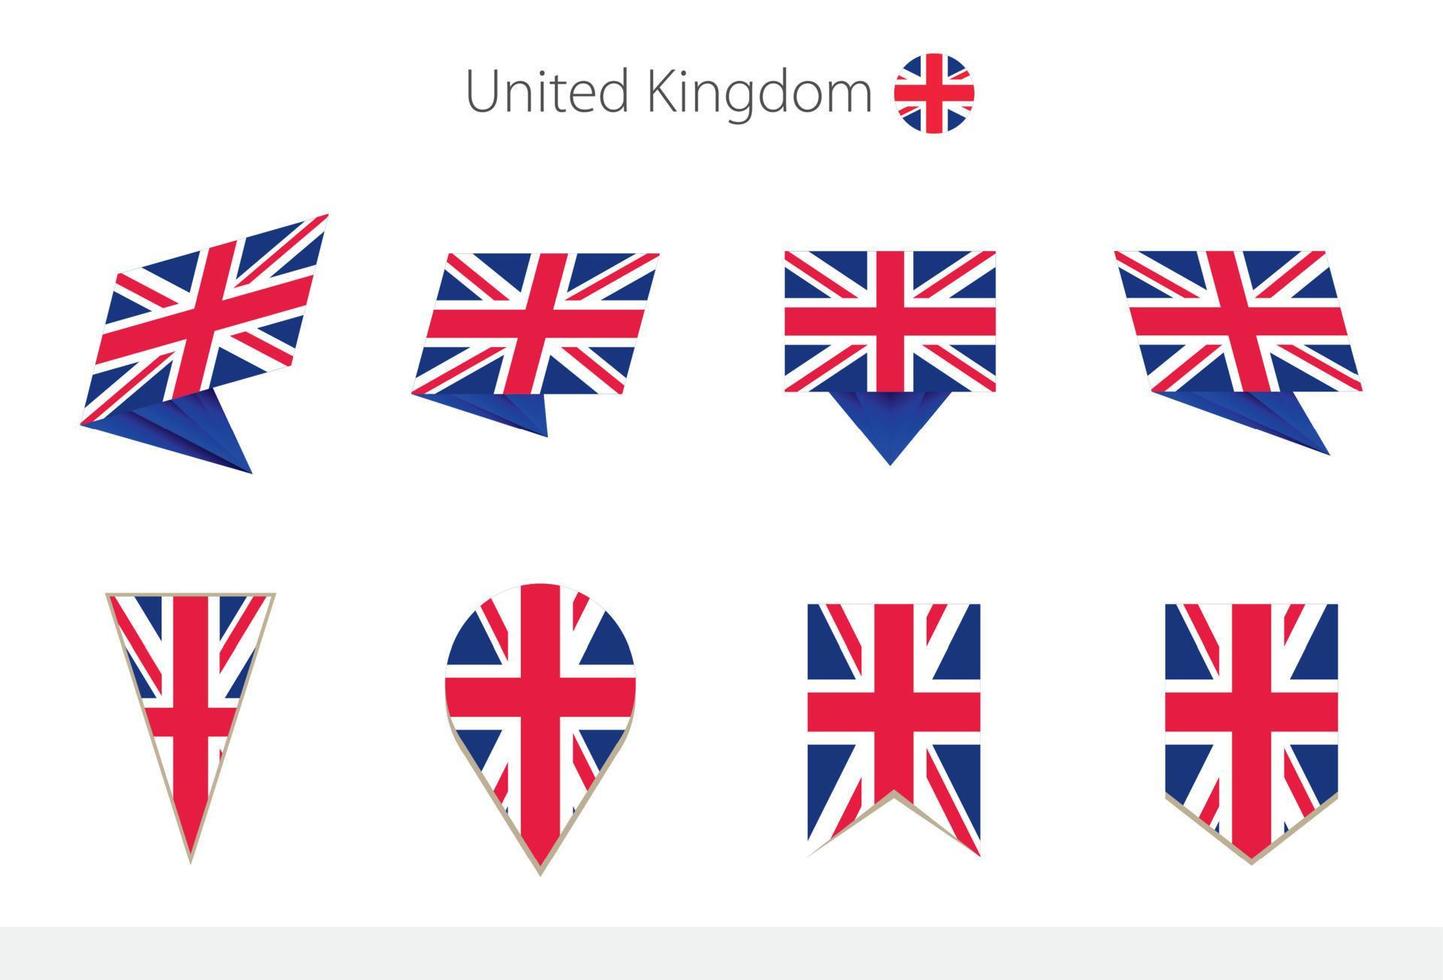 United Kingdom national flag collection, eight versions of United Kingdom vector flags.